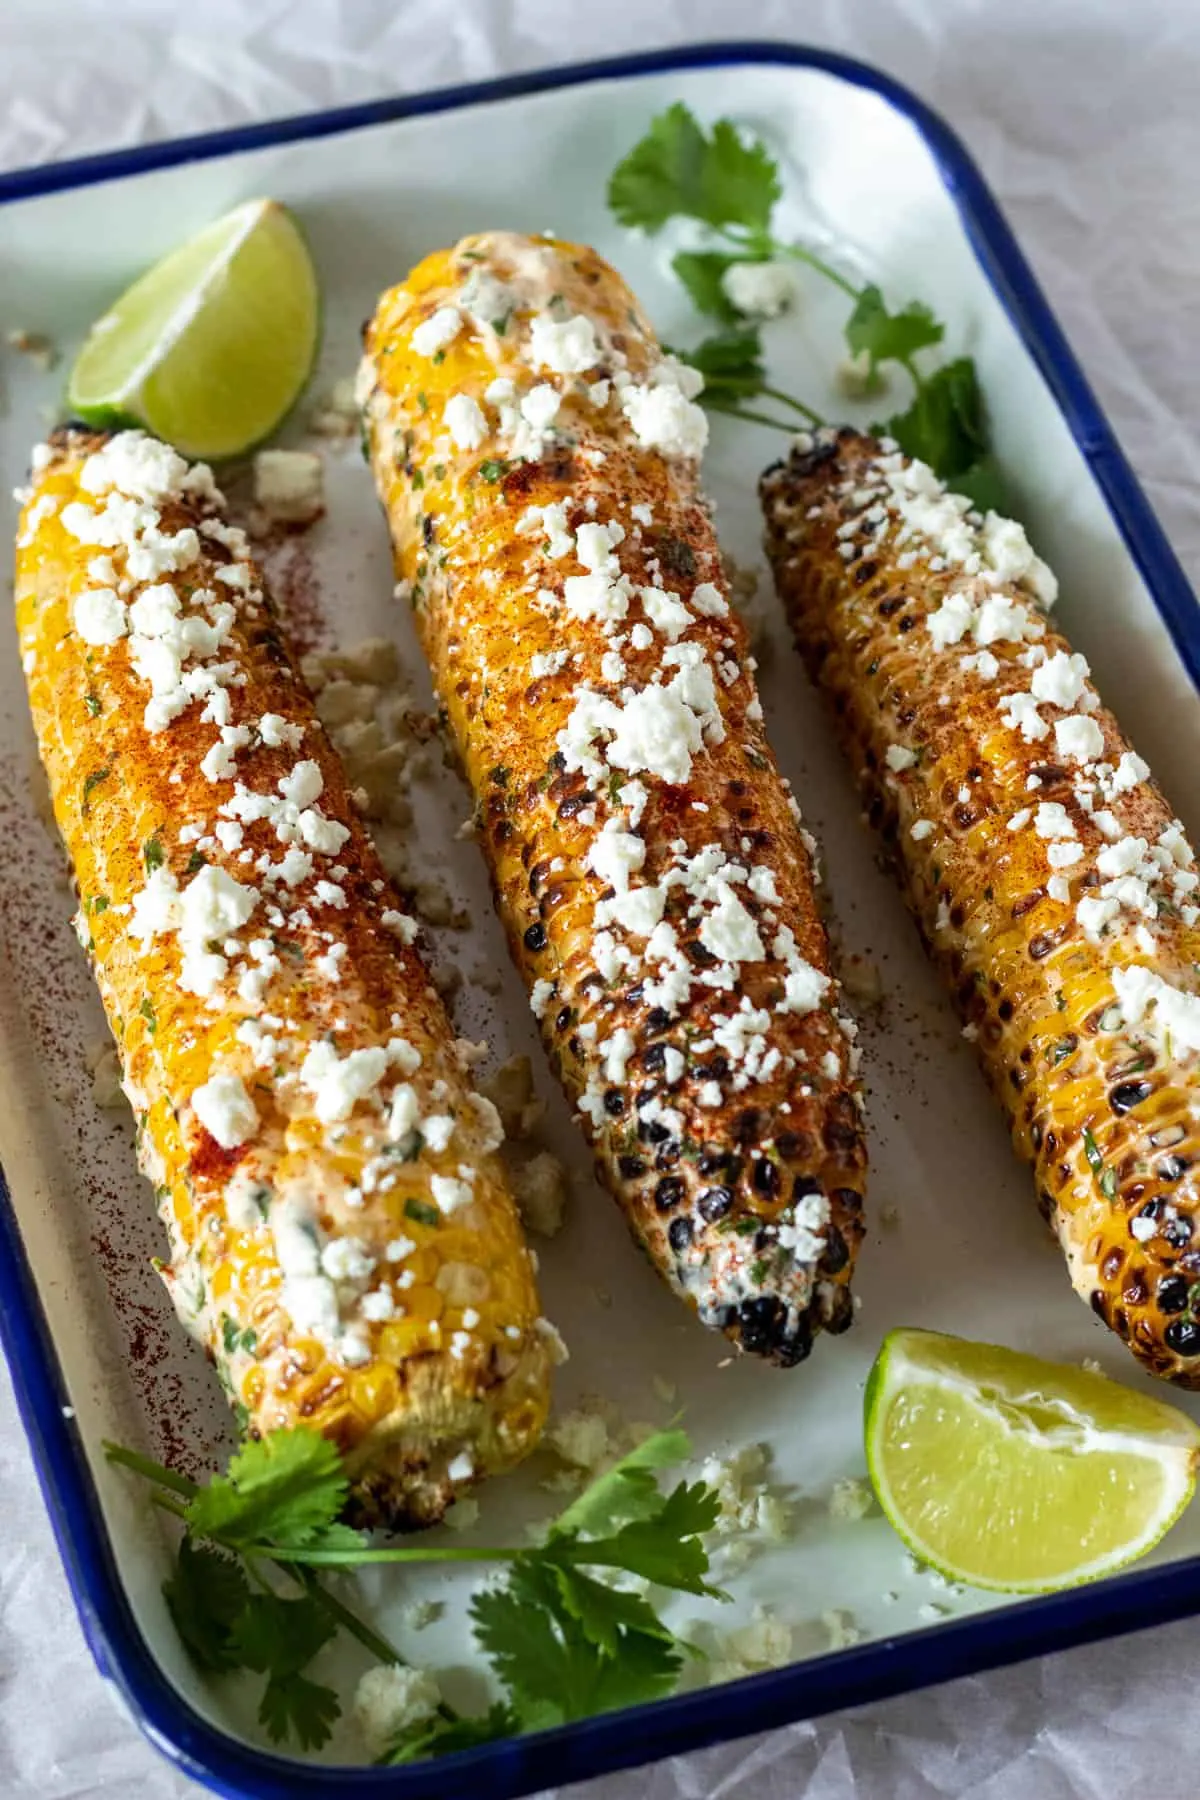 Grilled Mexican corn on serving platter with cream sauce and crumbled cheese.